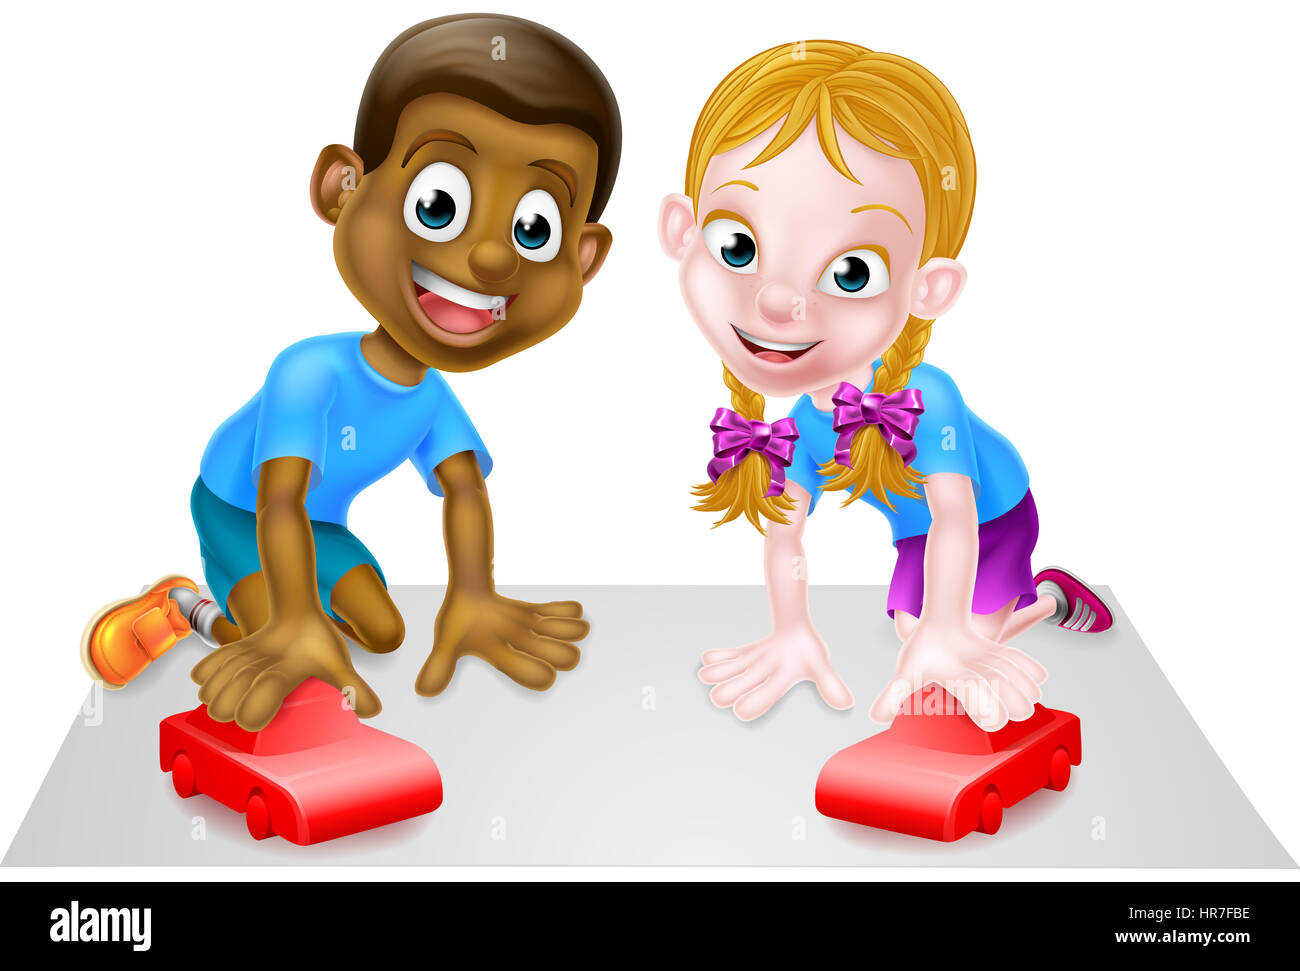 A boy and girl playing with their toy red cars. Stock Photo